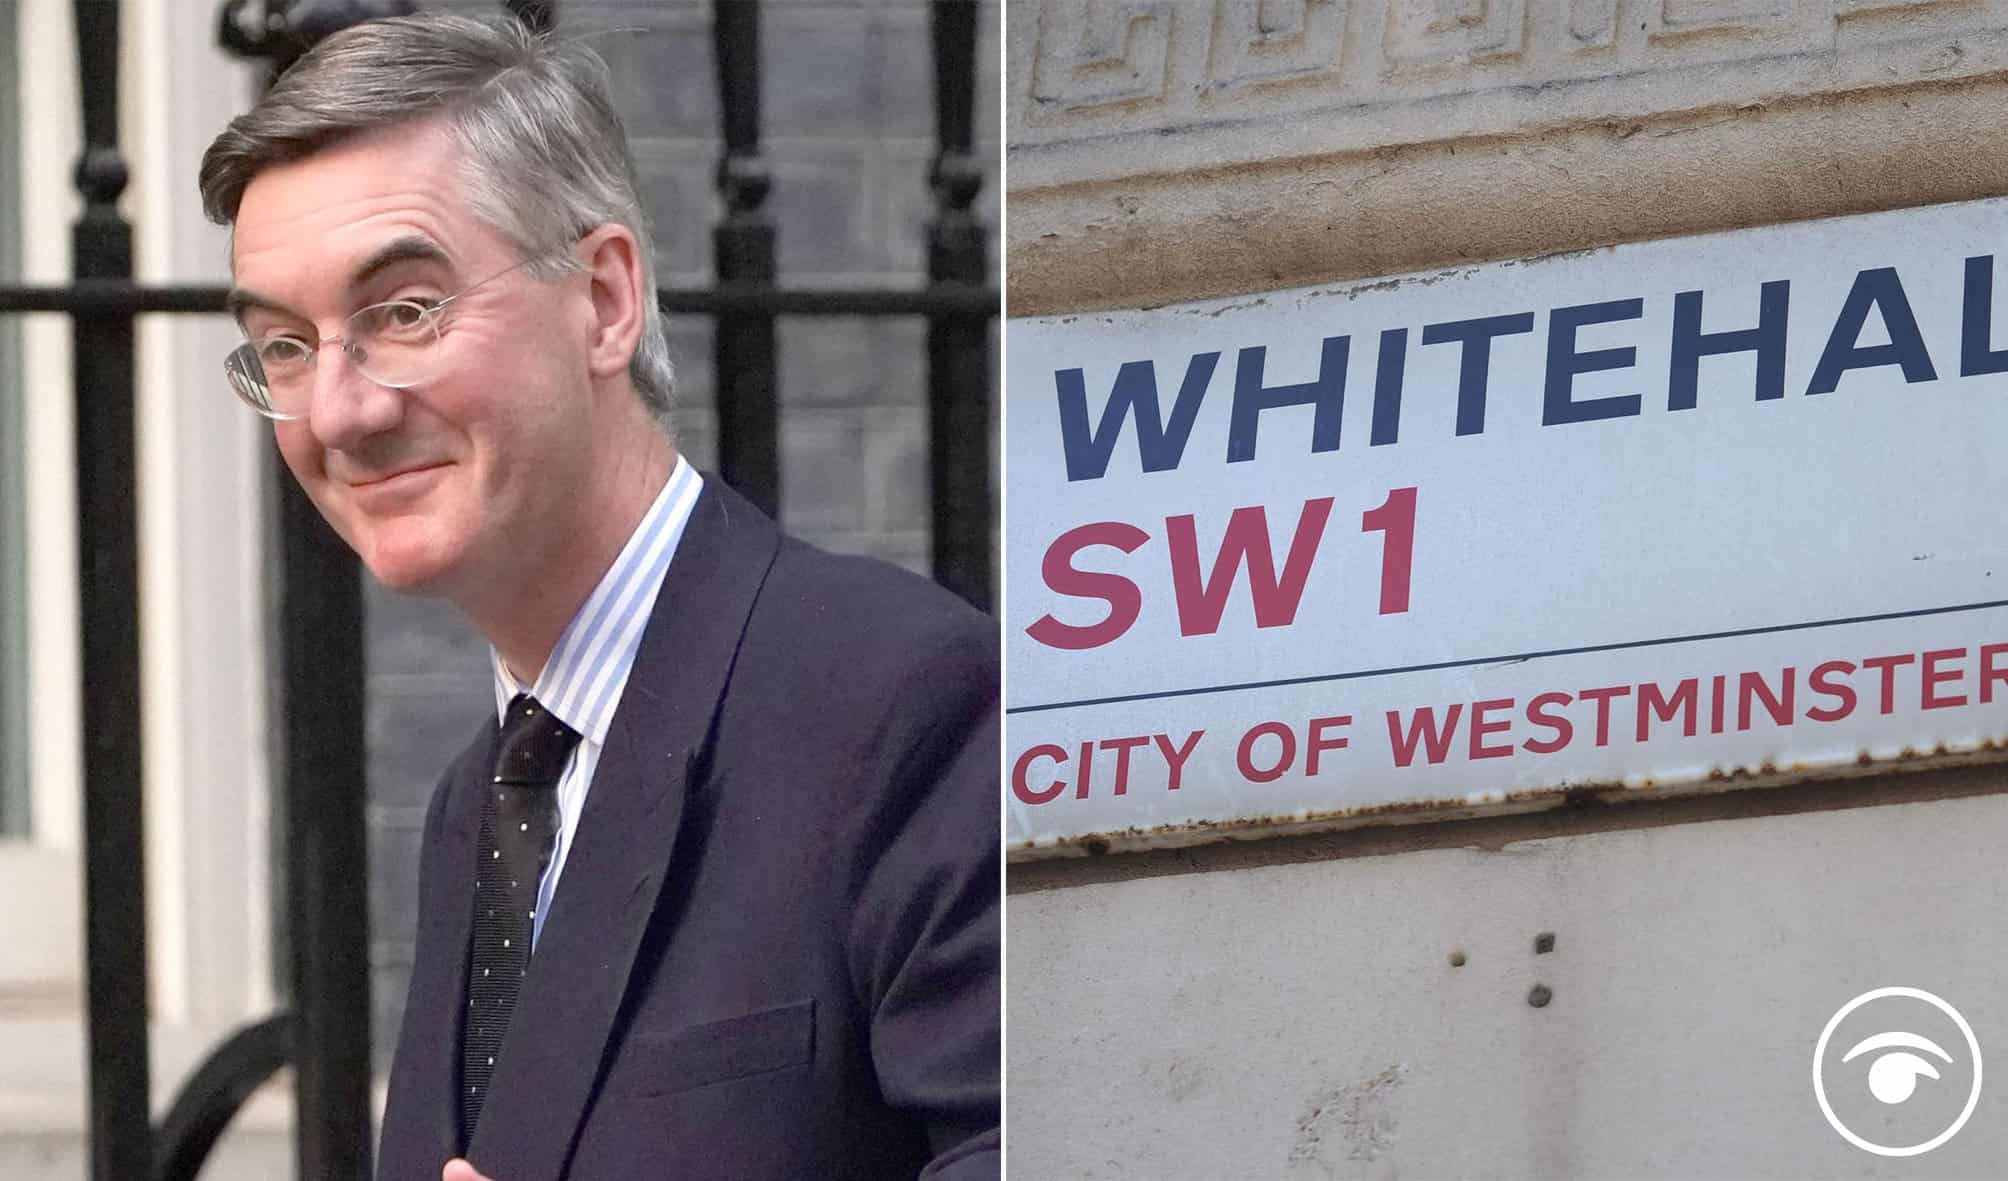 Jacob Rees-Mogg is struggling to save efficiencies in government and for himself